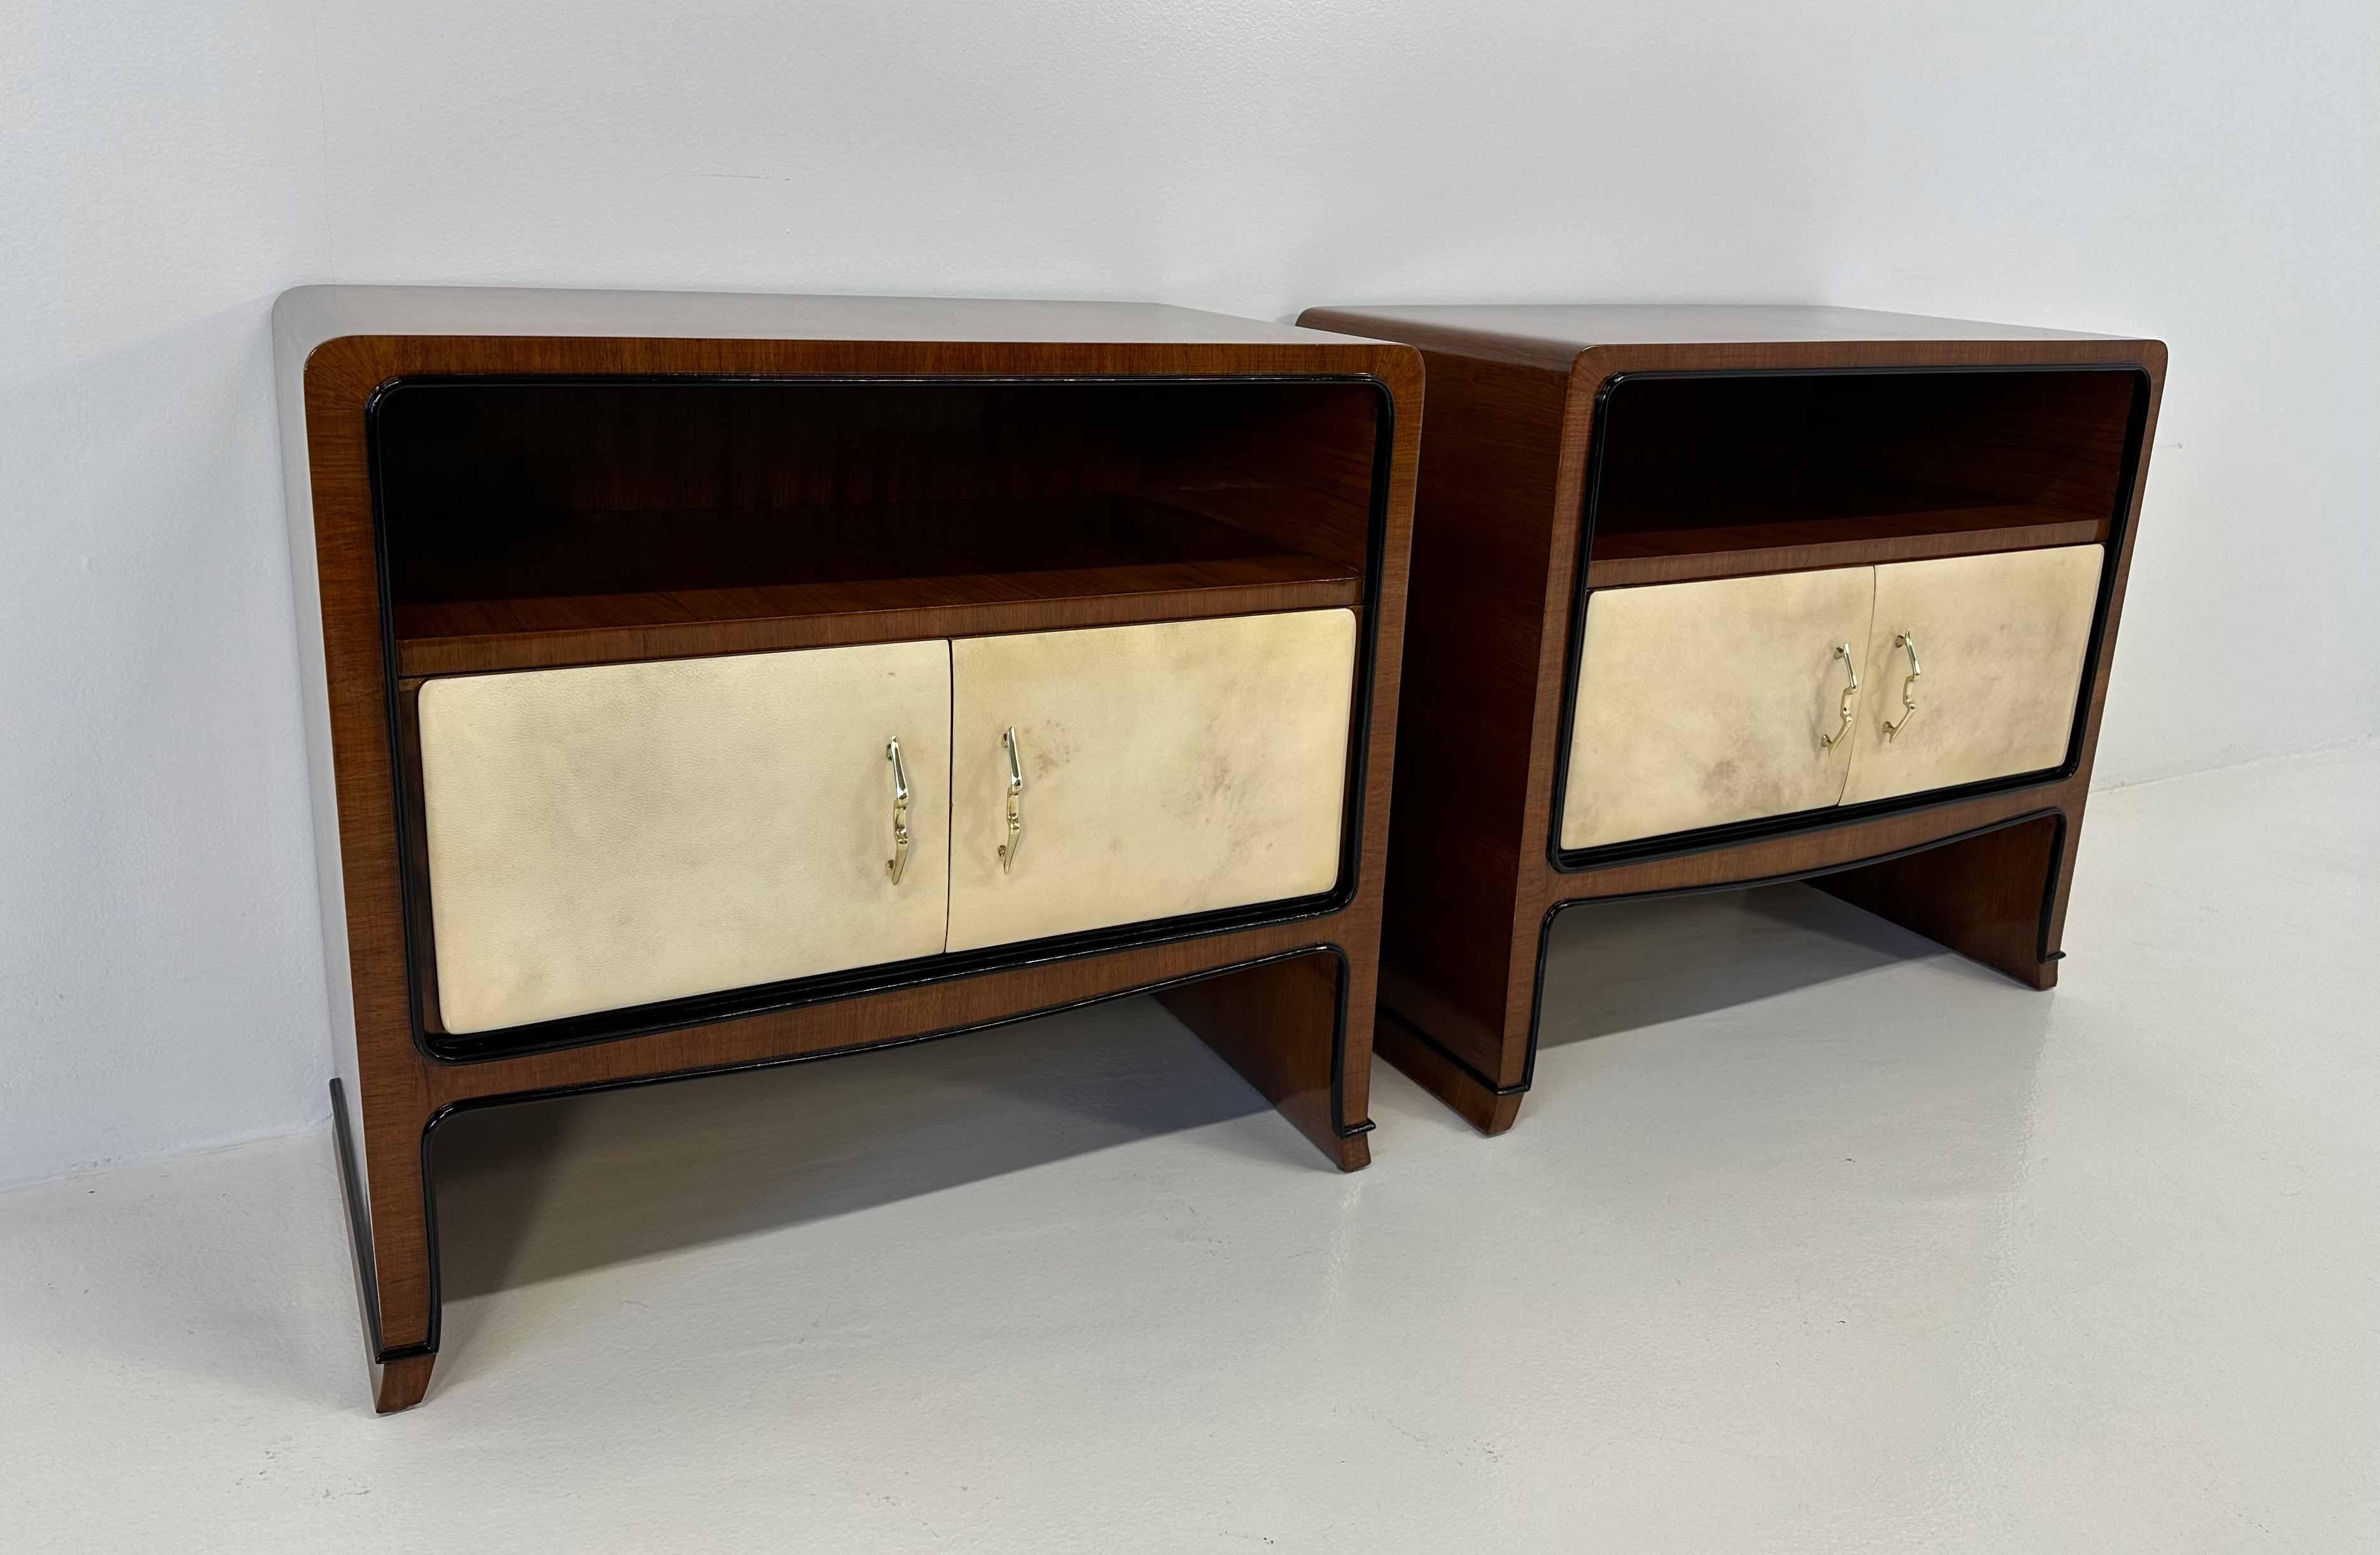 Brass Italian Art Deco Parchment and Walnut Paolo Buffa Nightstands, 1940s For Sale